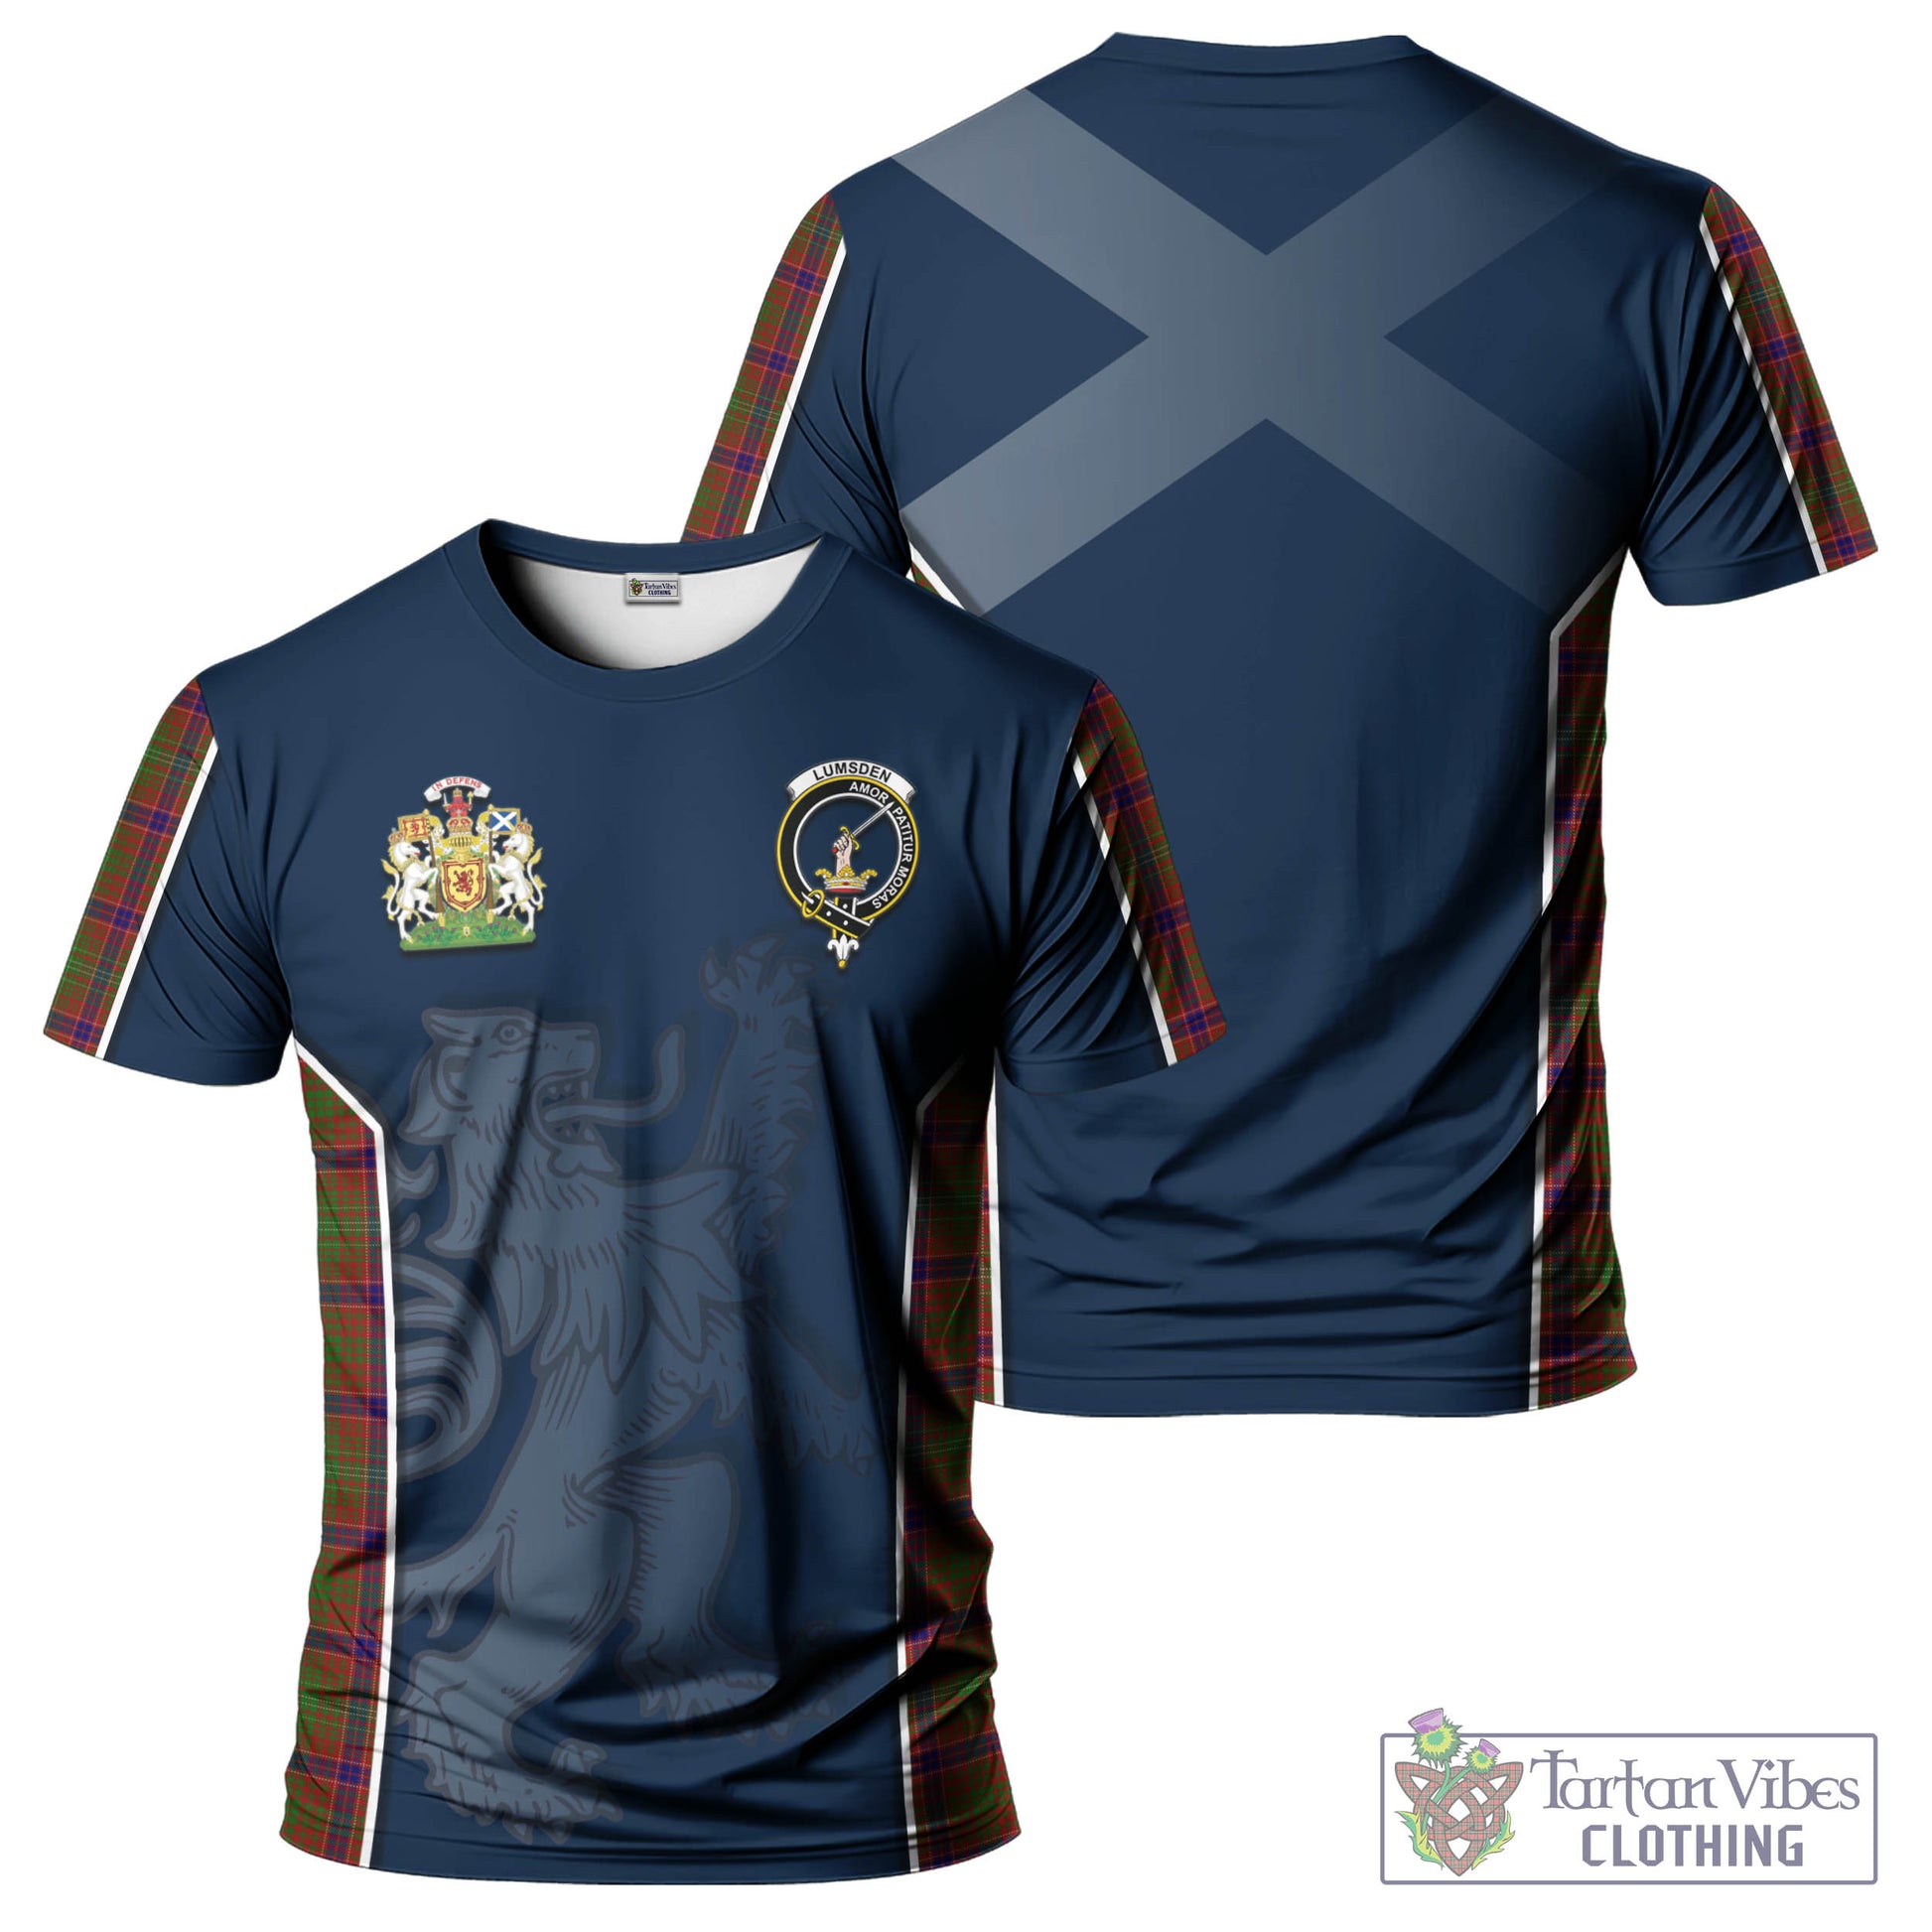 Tartan Vibes Clothing Lumsden Tartan T-Shirt with Family Crest and Lion Rampant Vibes Sport Style